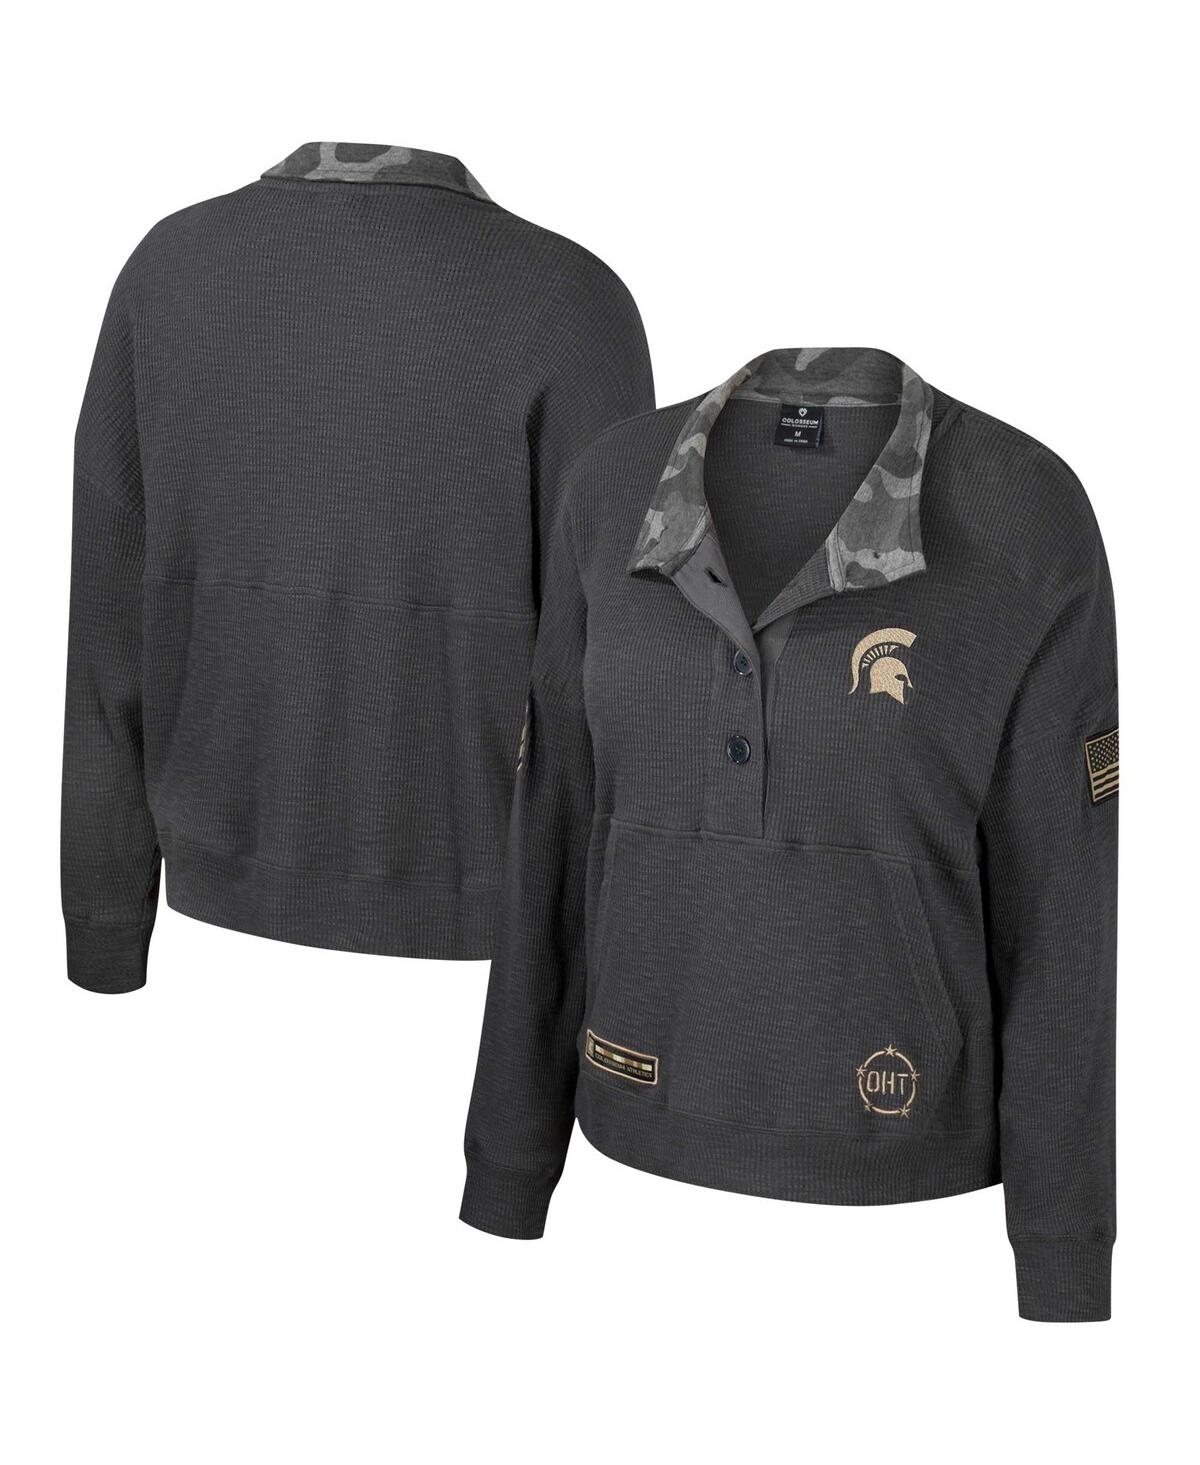 Shop Colosseum Women's  Heather Charcoal Michigan State Spartans Oht Military-inspired Appreciation Paybac